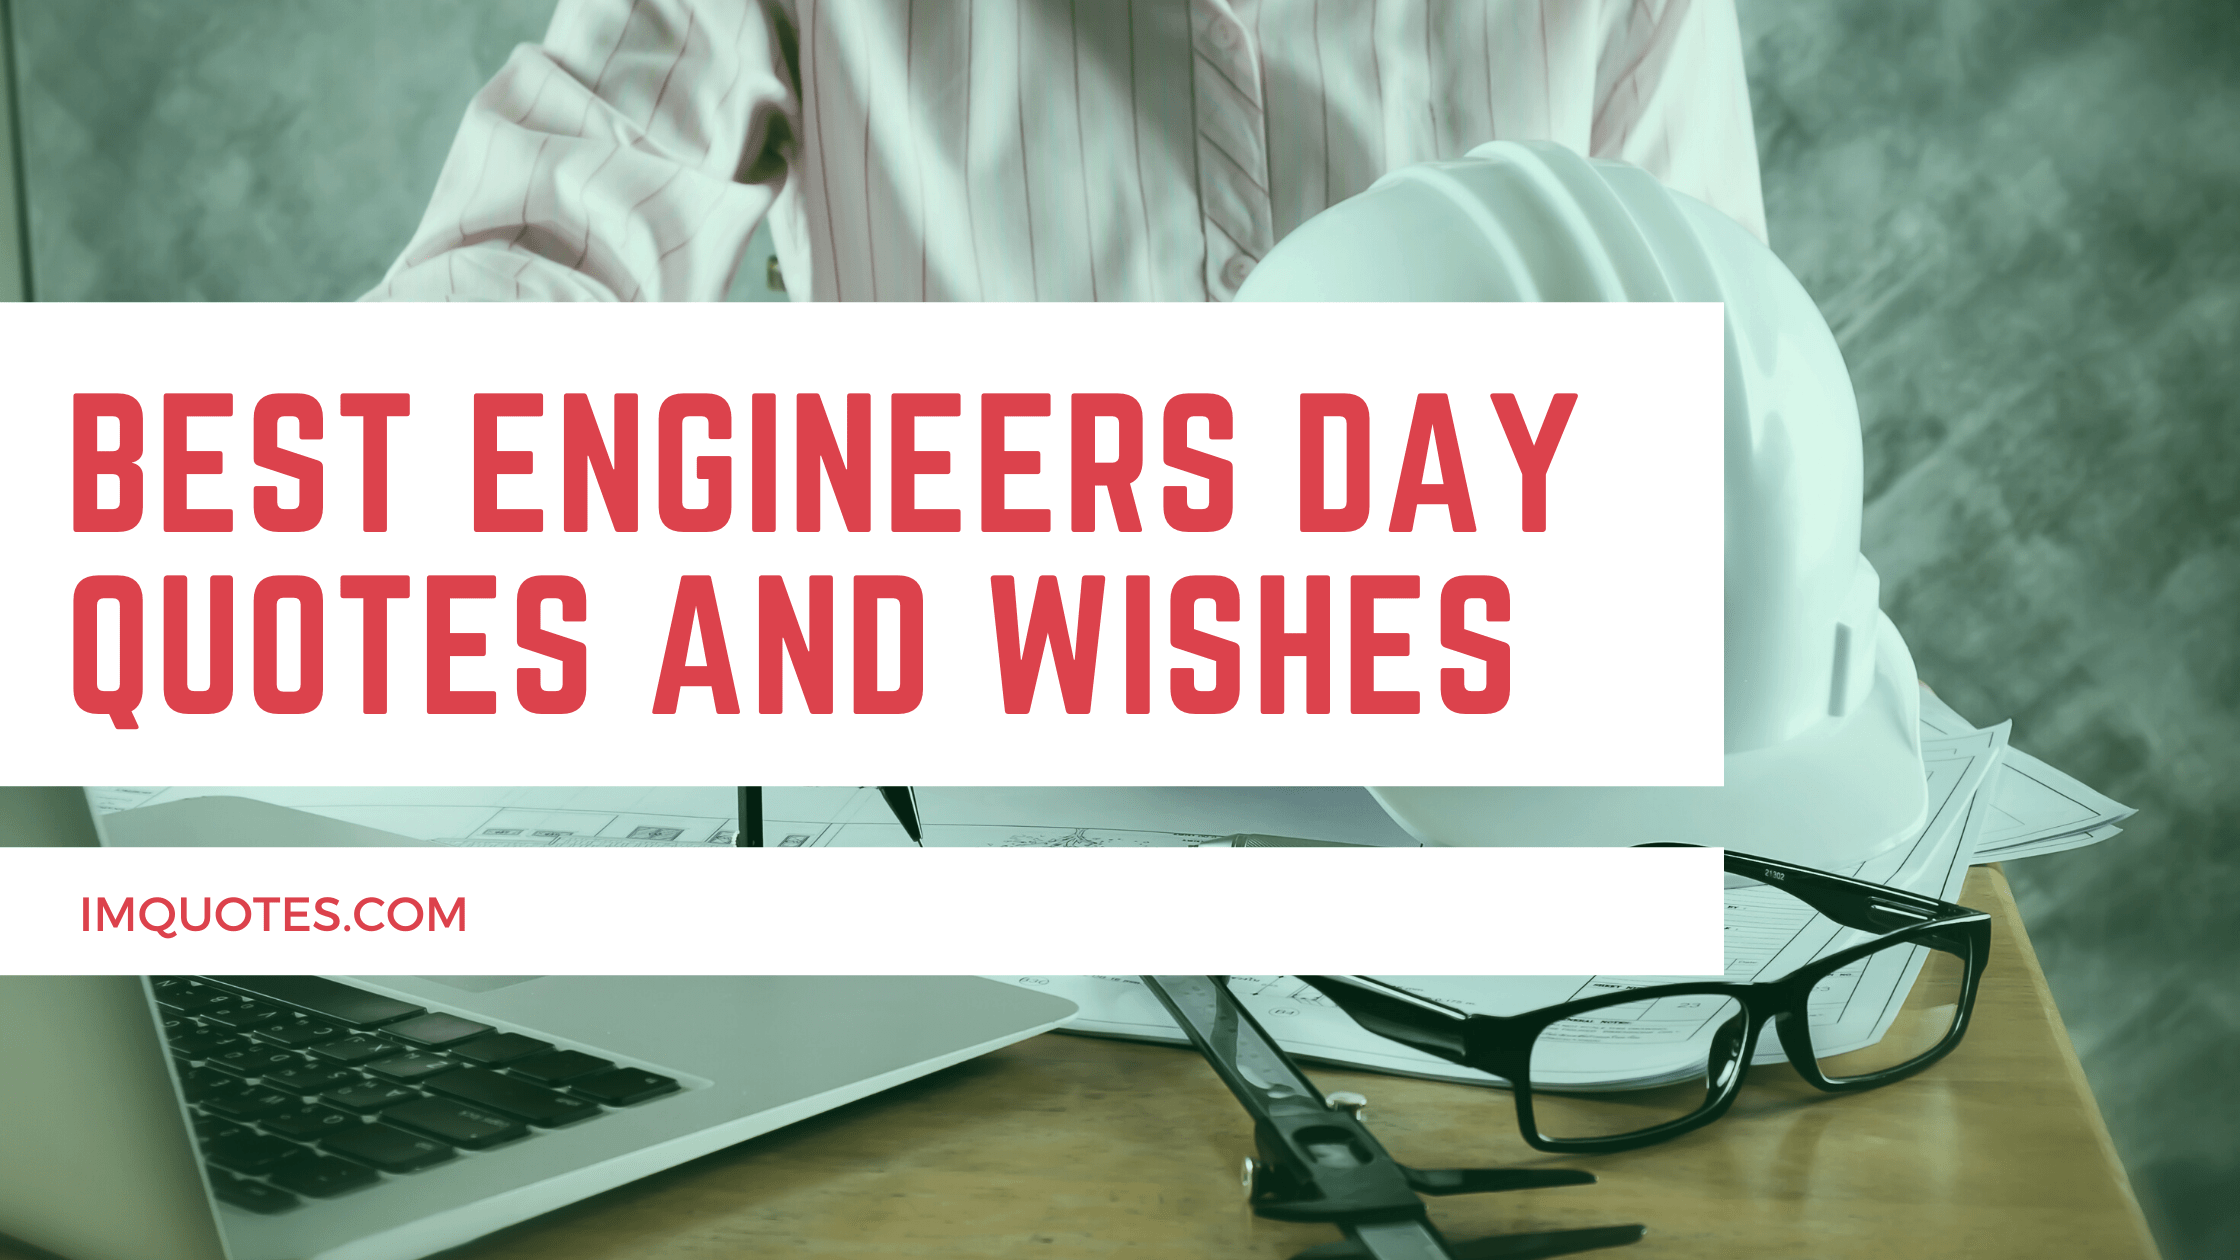 Best Engineers Day Quotes and Wishes